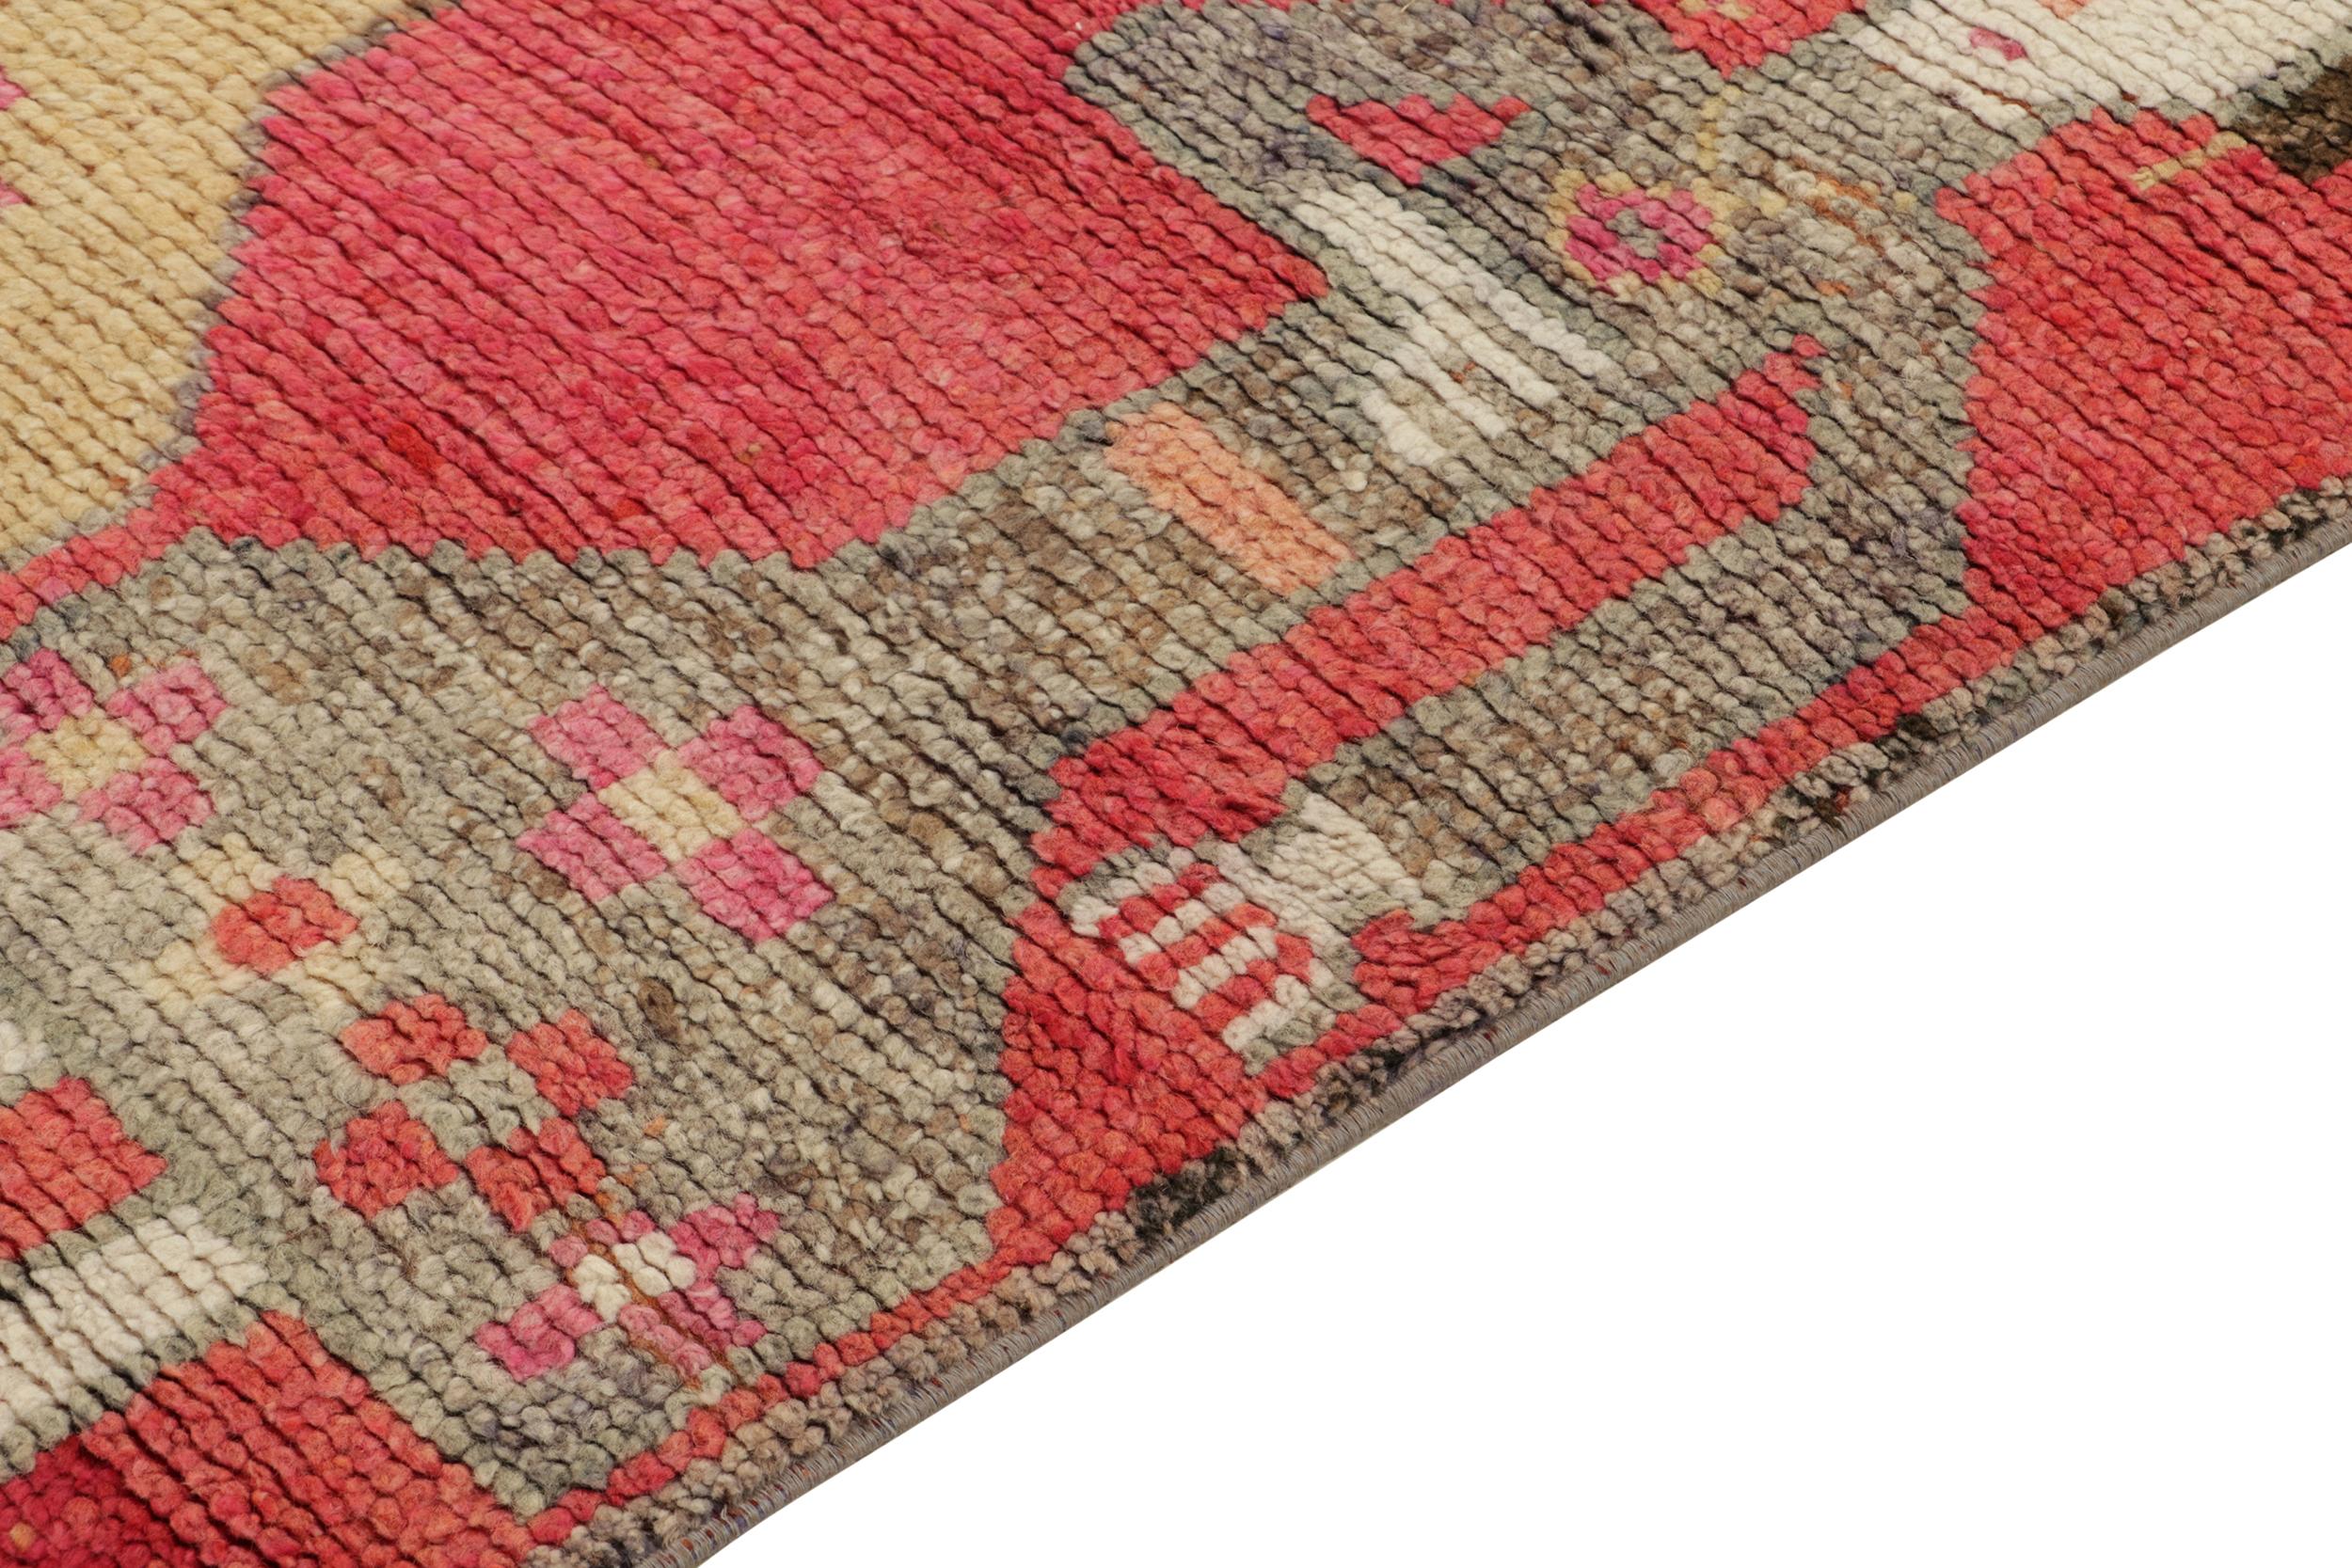 1950s Vintage Tribal Runner in Red Pink Beige Pictorial Medallion by Rug & Kilim In Good Condition For Sale In Long Island City, NY